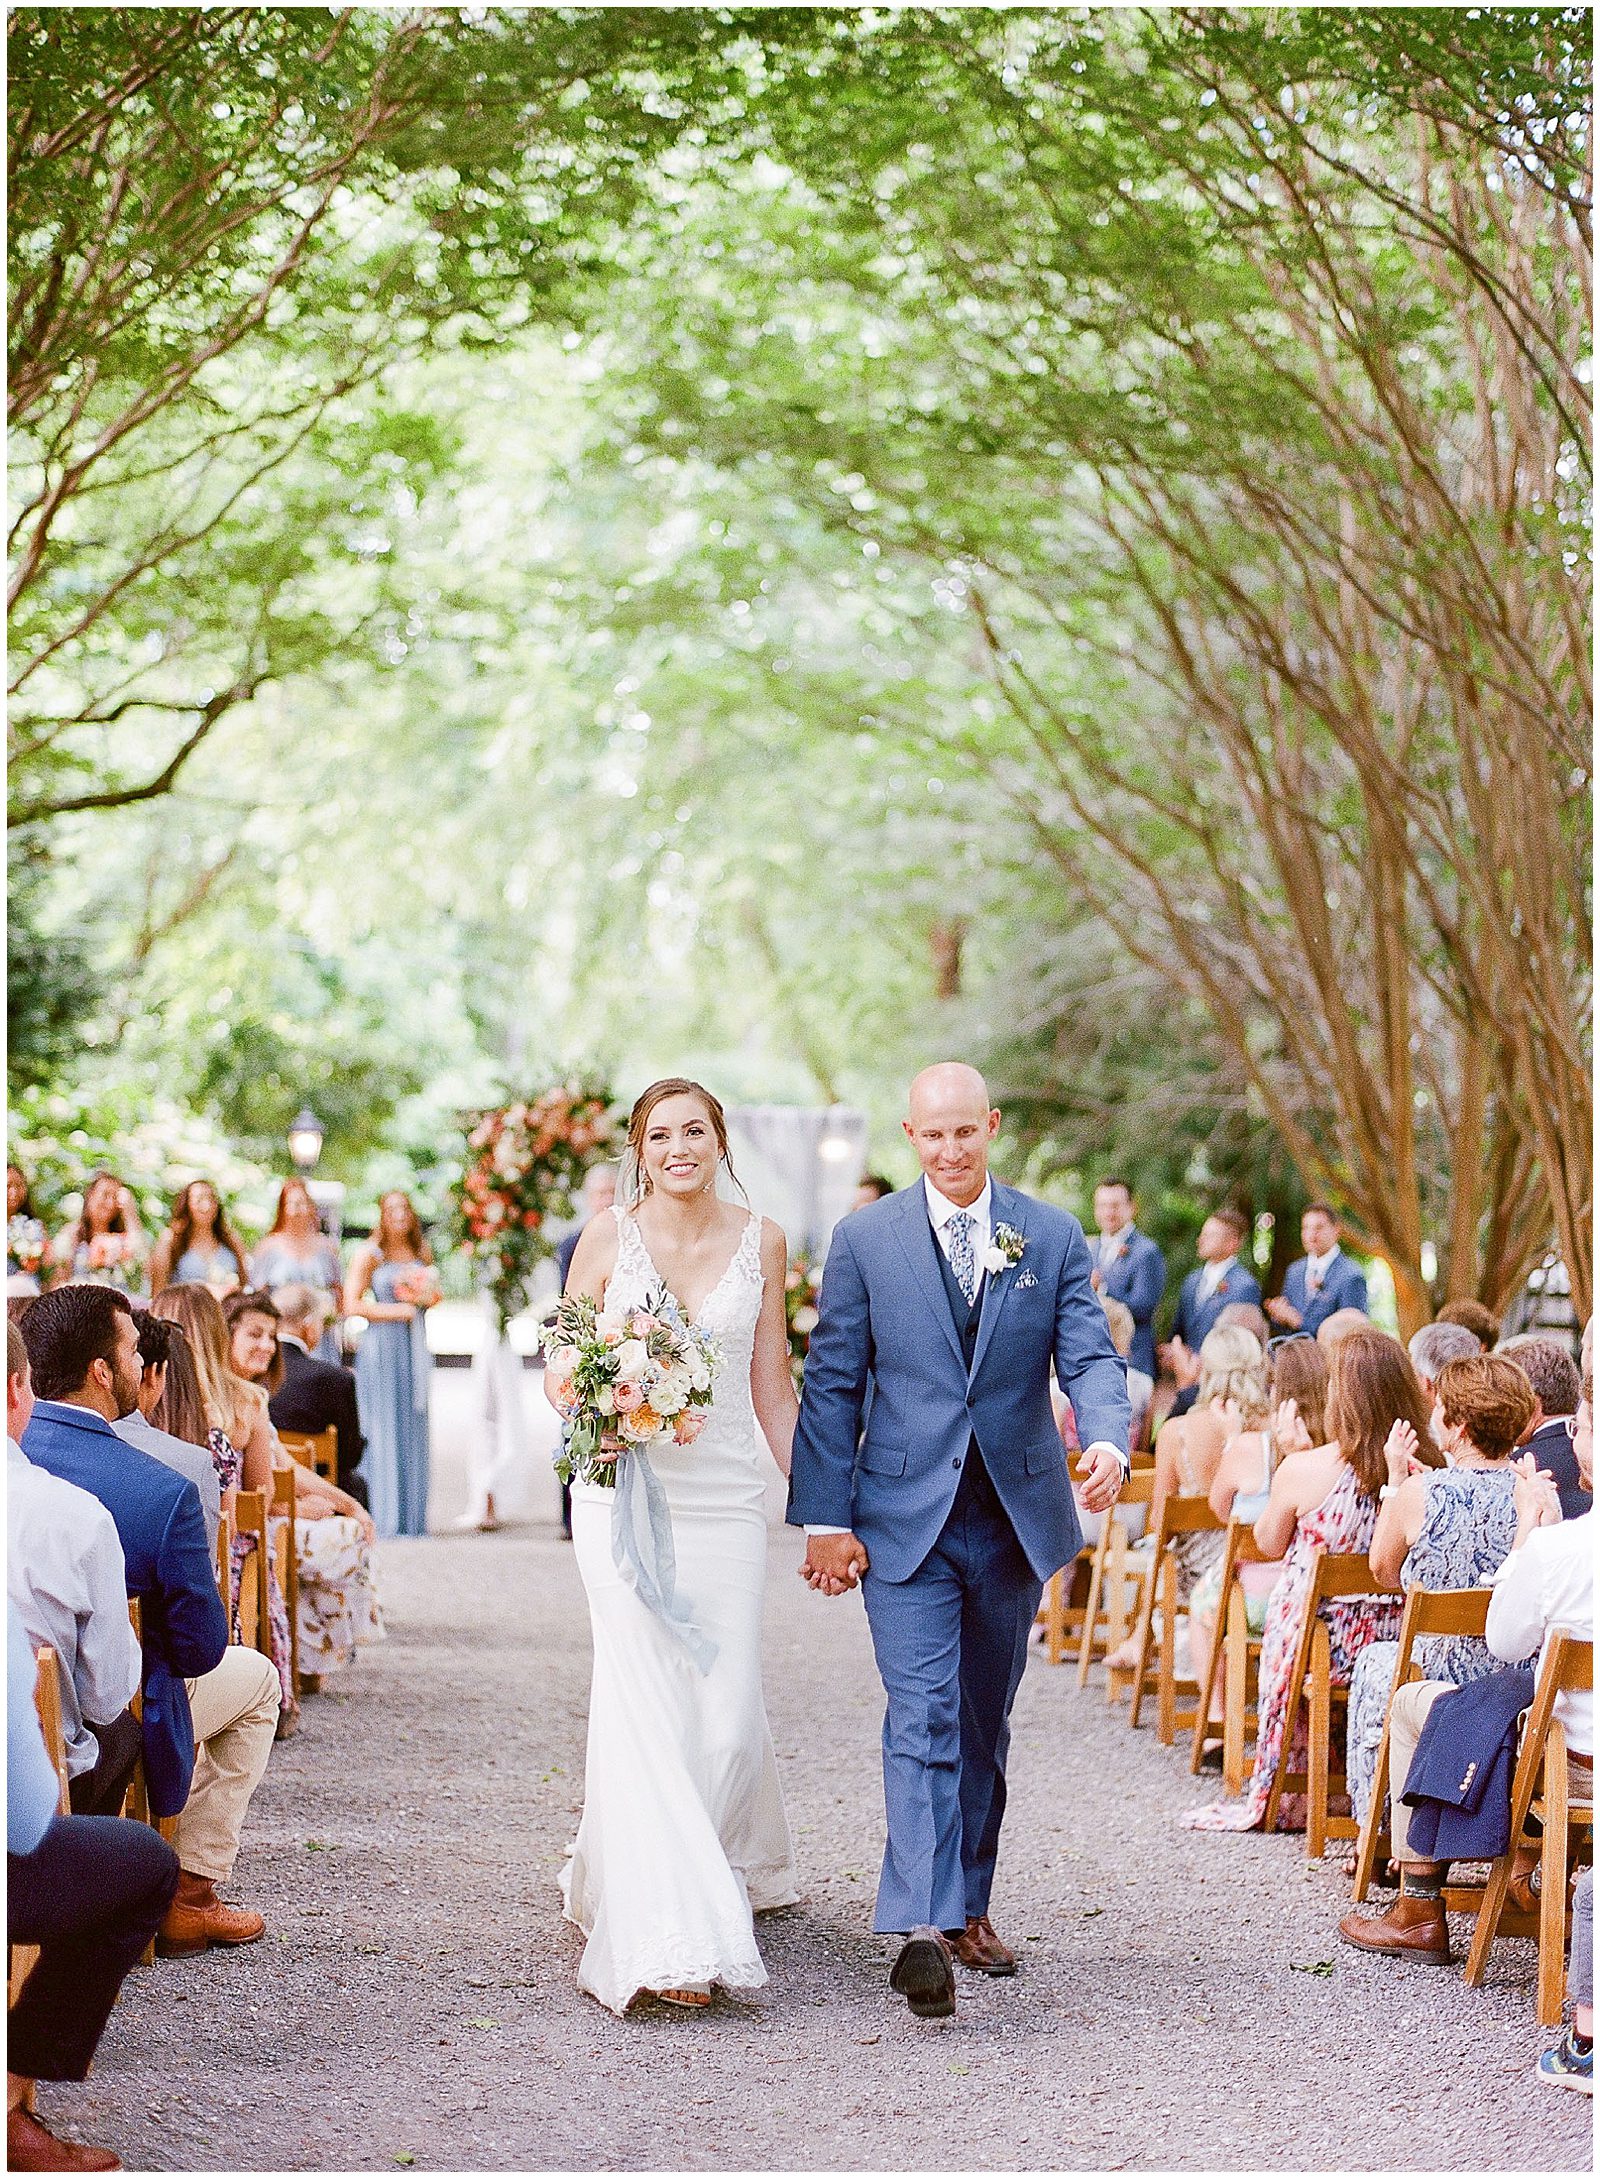 Bride and Groom Exiting Ceremony Under Trees Photo